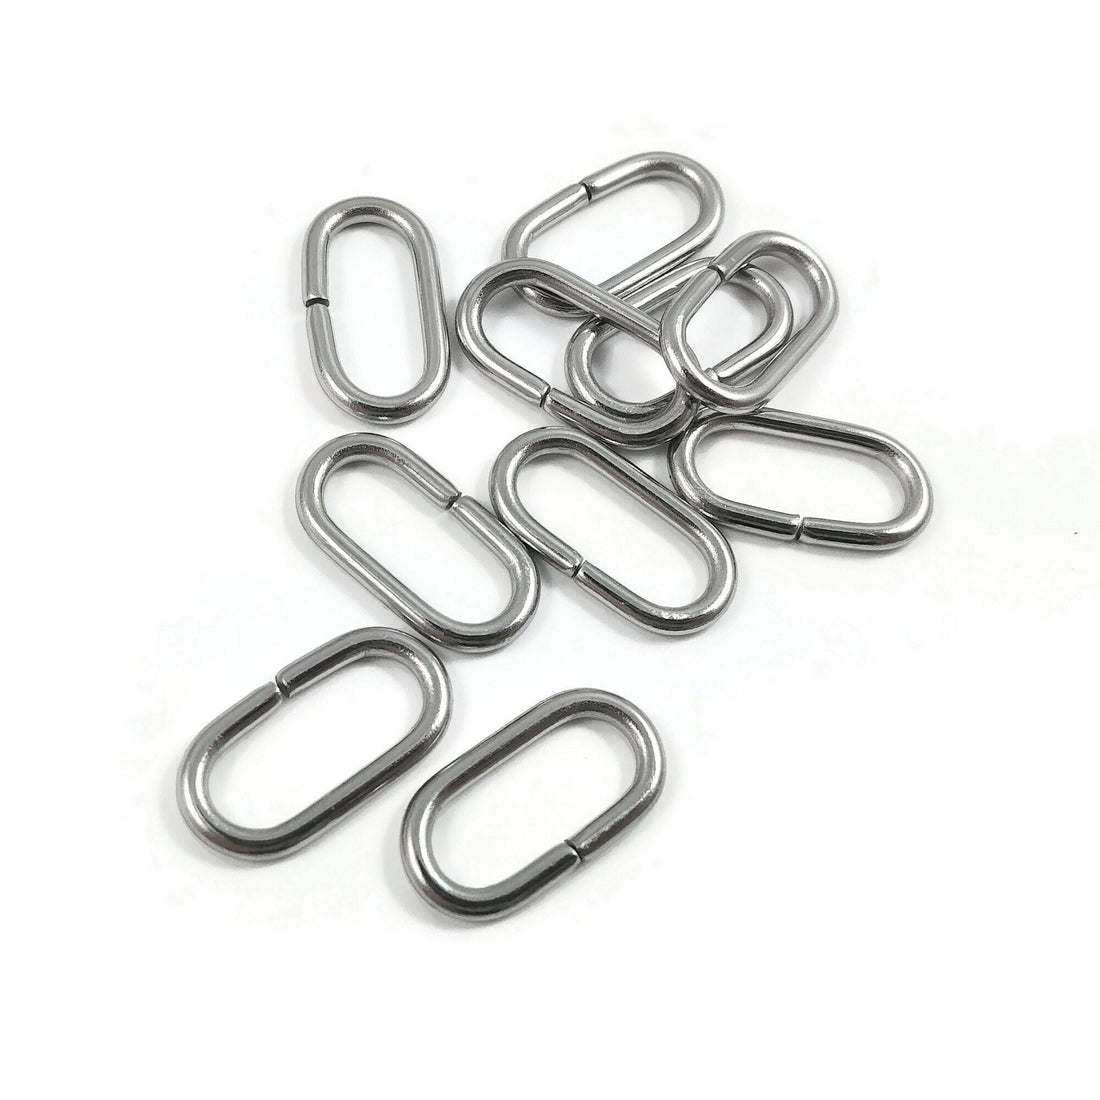 Large oval jump rings, 10pcs stainless steel open jumprings, 12 gauge hardware for jewelry making